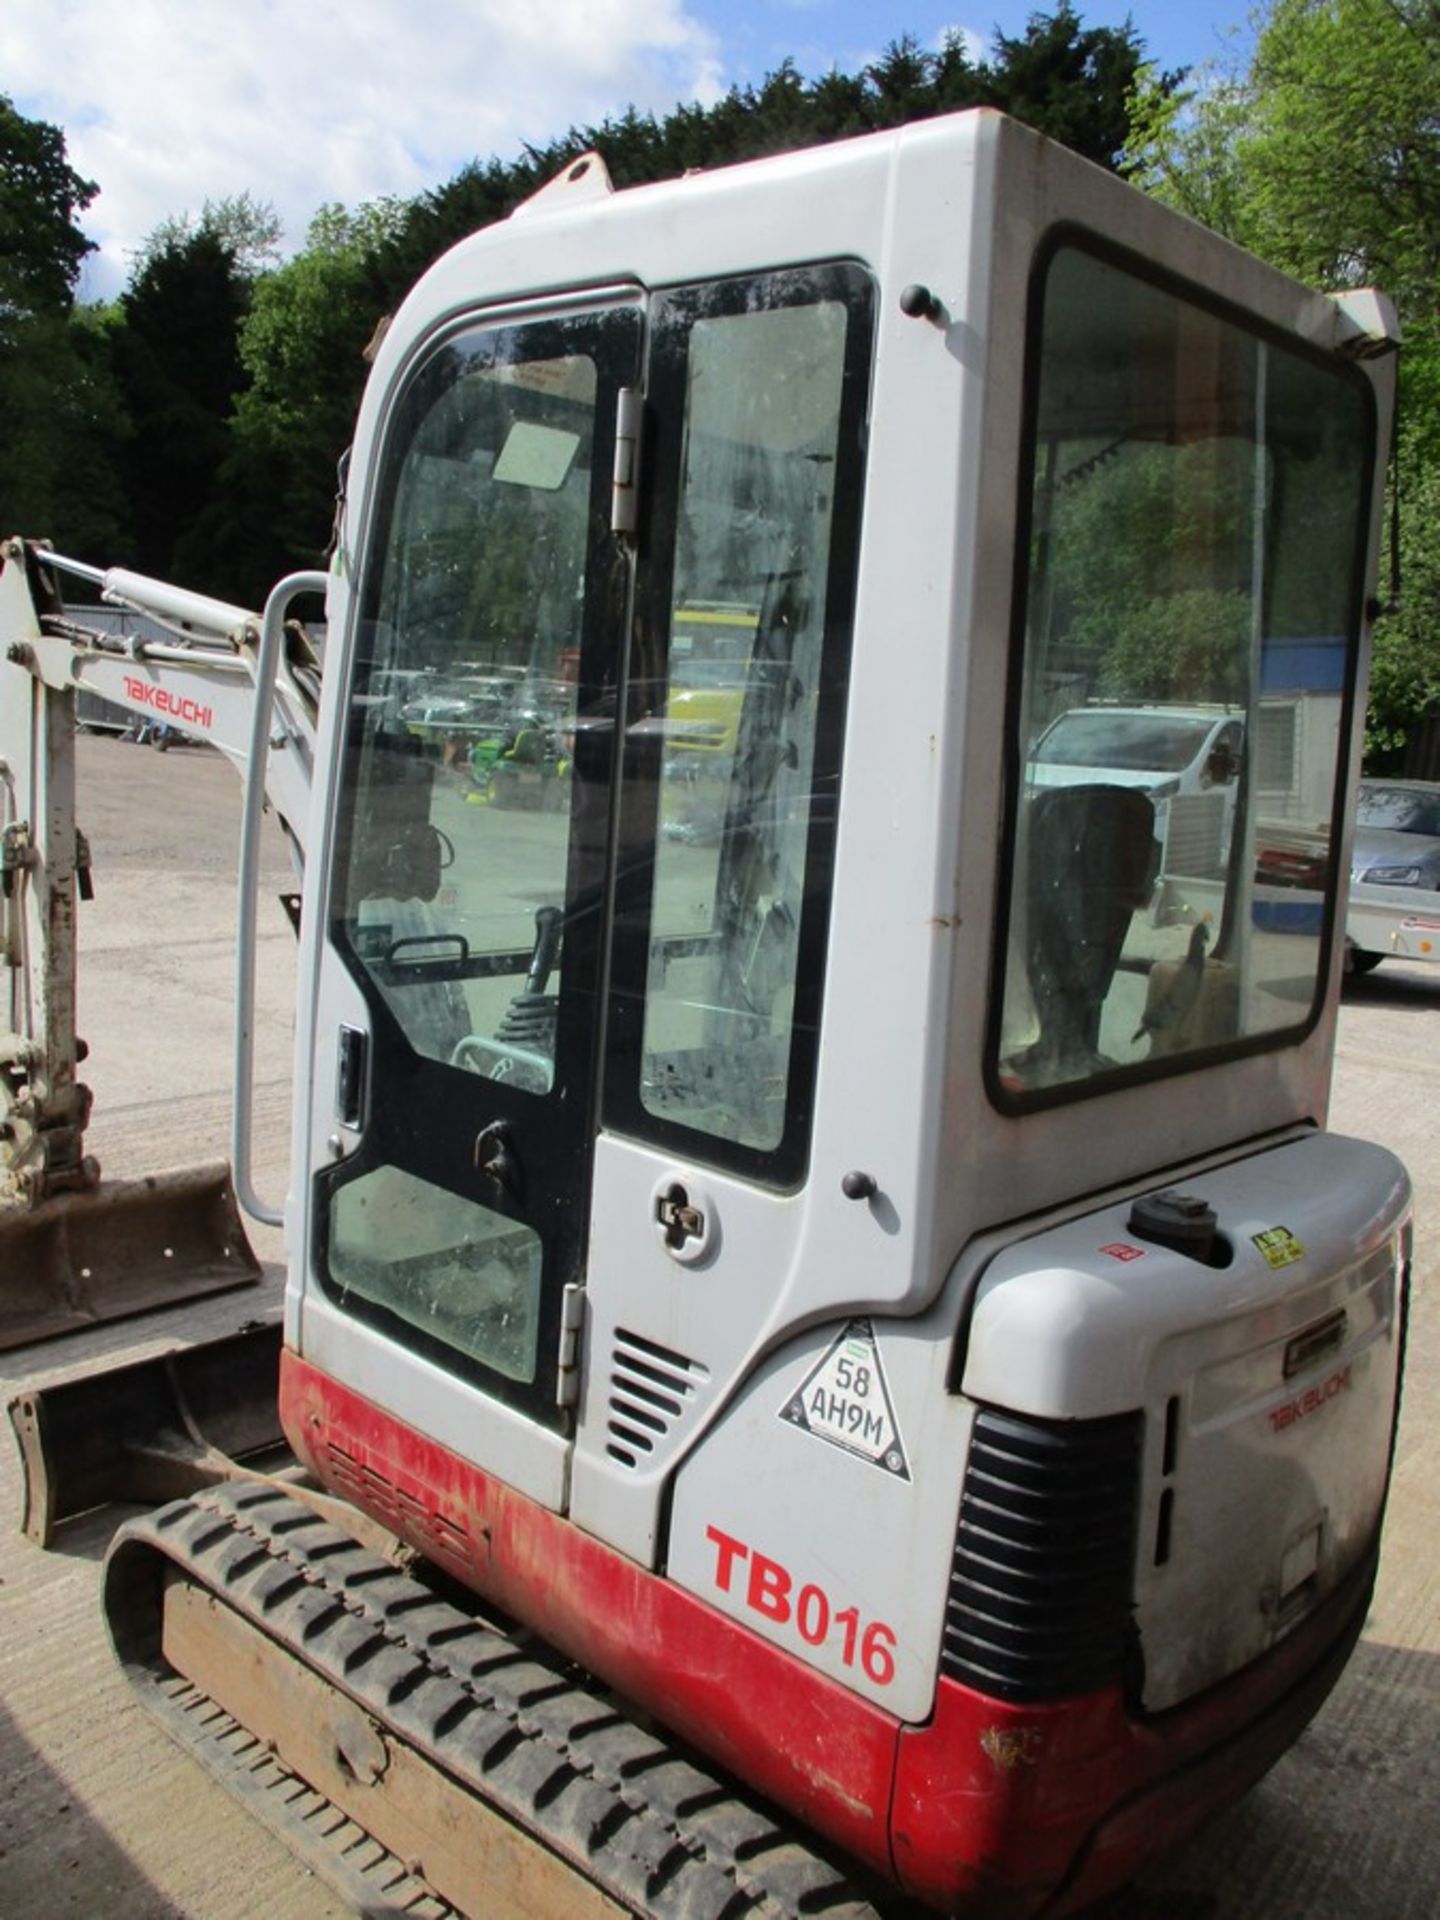 TAKEUCHI TB106 MINI DIGGER C.W 1 BUCKET 2013 3700HRS FULL CAB (DIRECT FROM A COMPANY) - Image 6 of 8